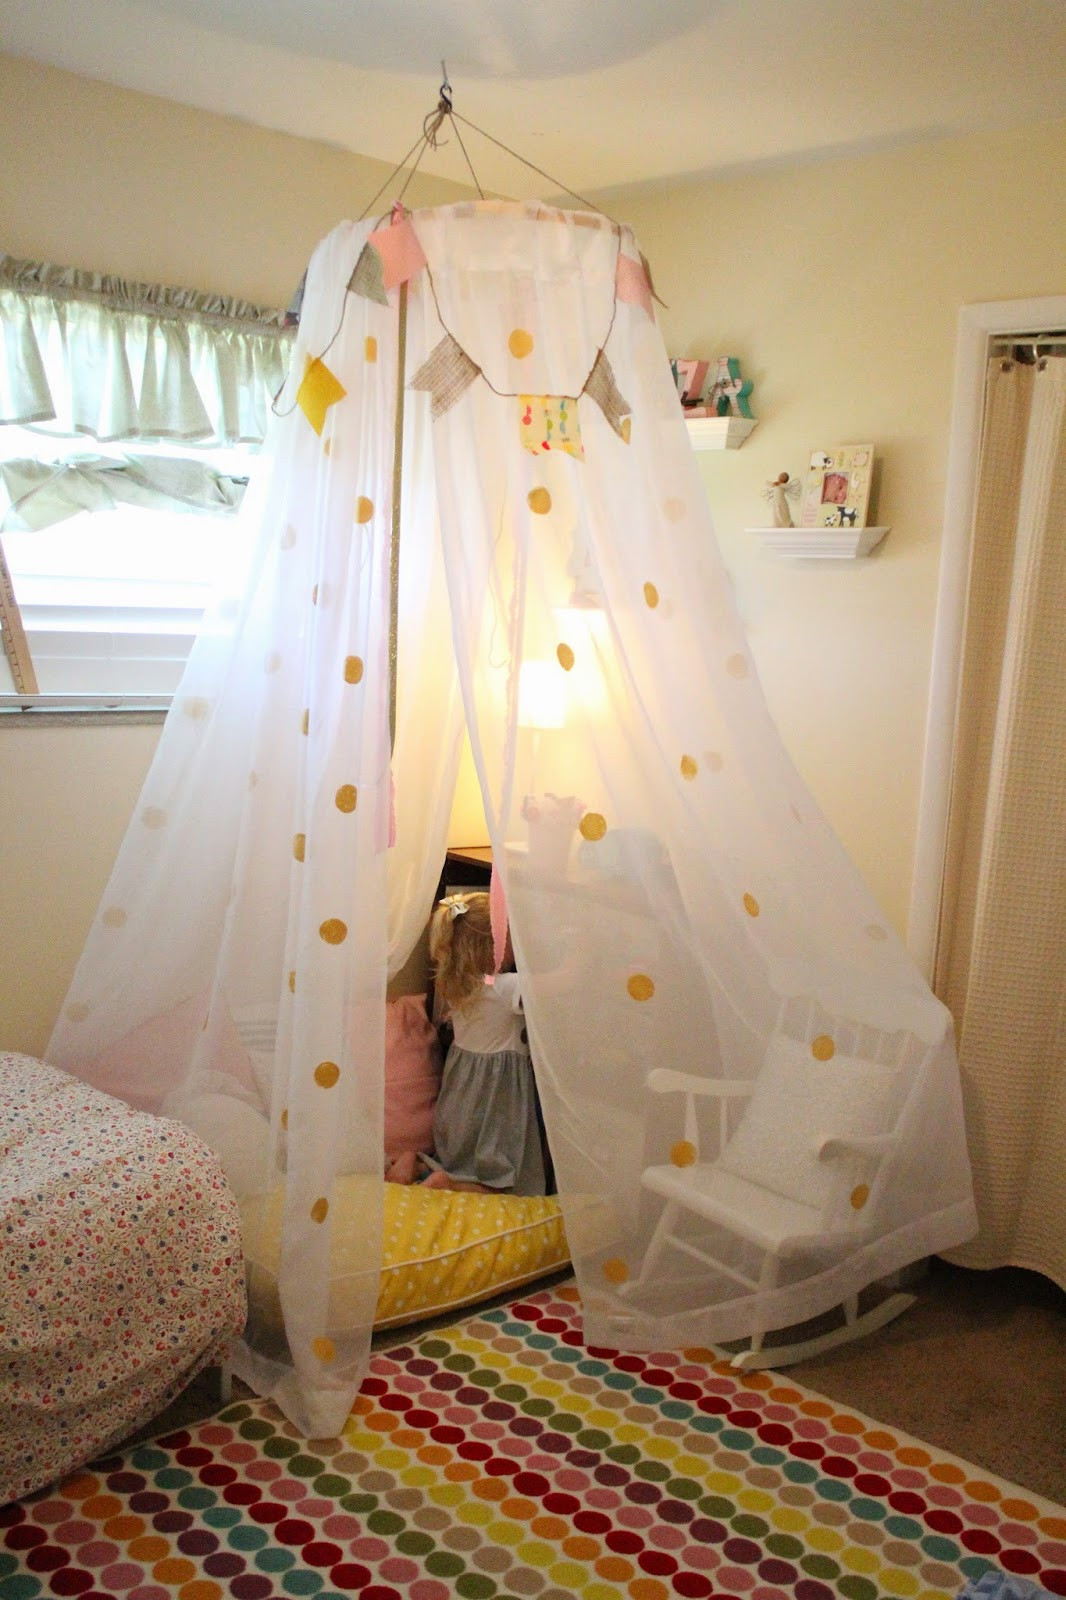 Toddler Bed Tent DIY
 Mommy Vignettes DIY No Sew Tent Canopy Tutorial